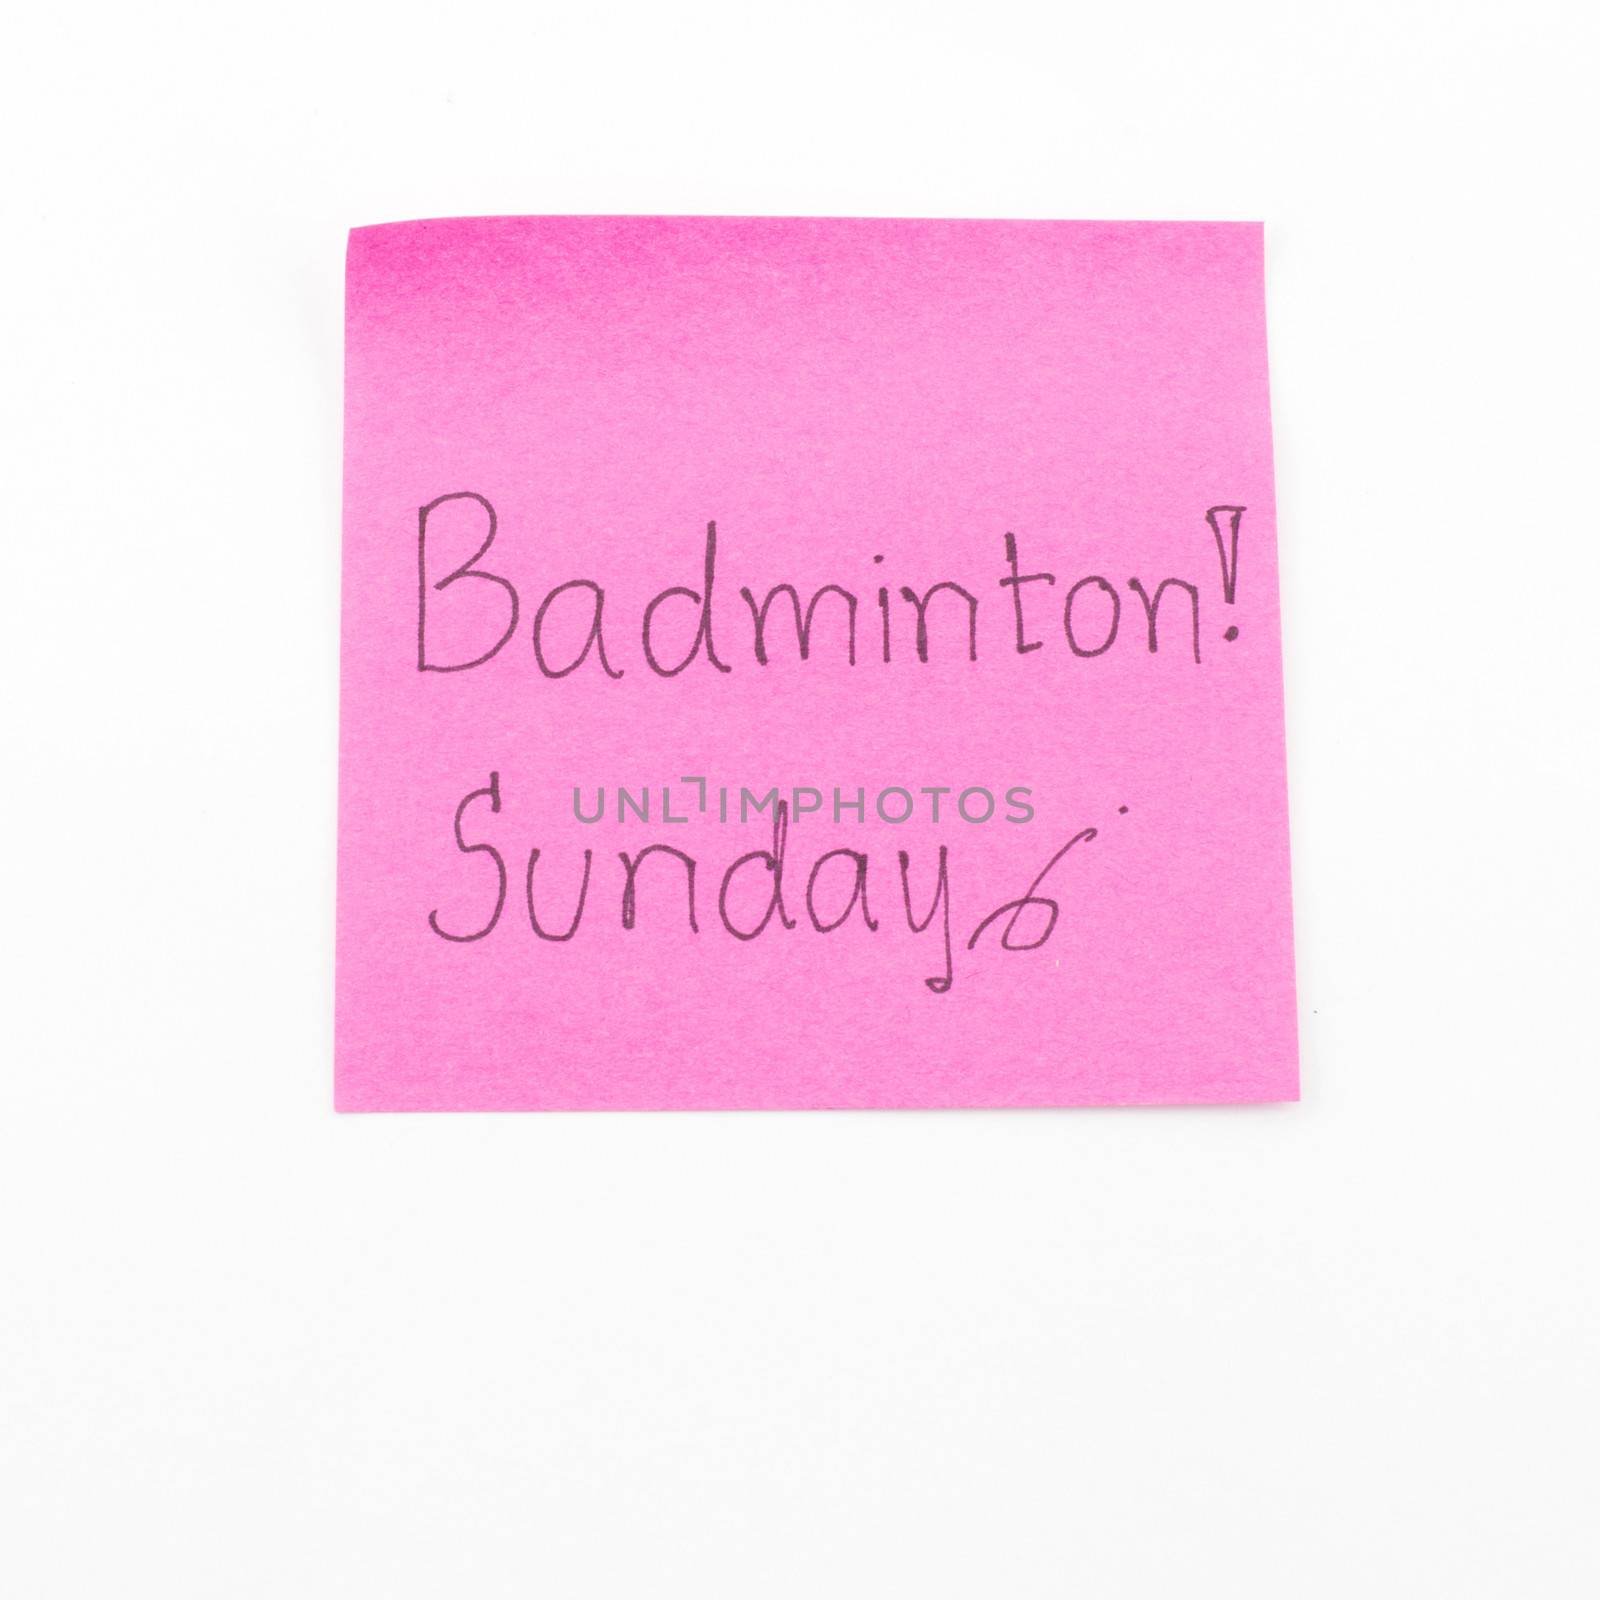 don't forget play badminton on sunday by ammza12